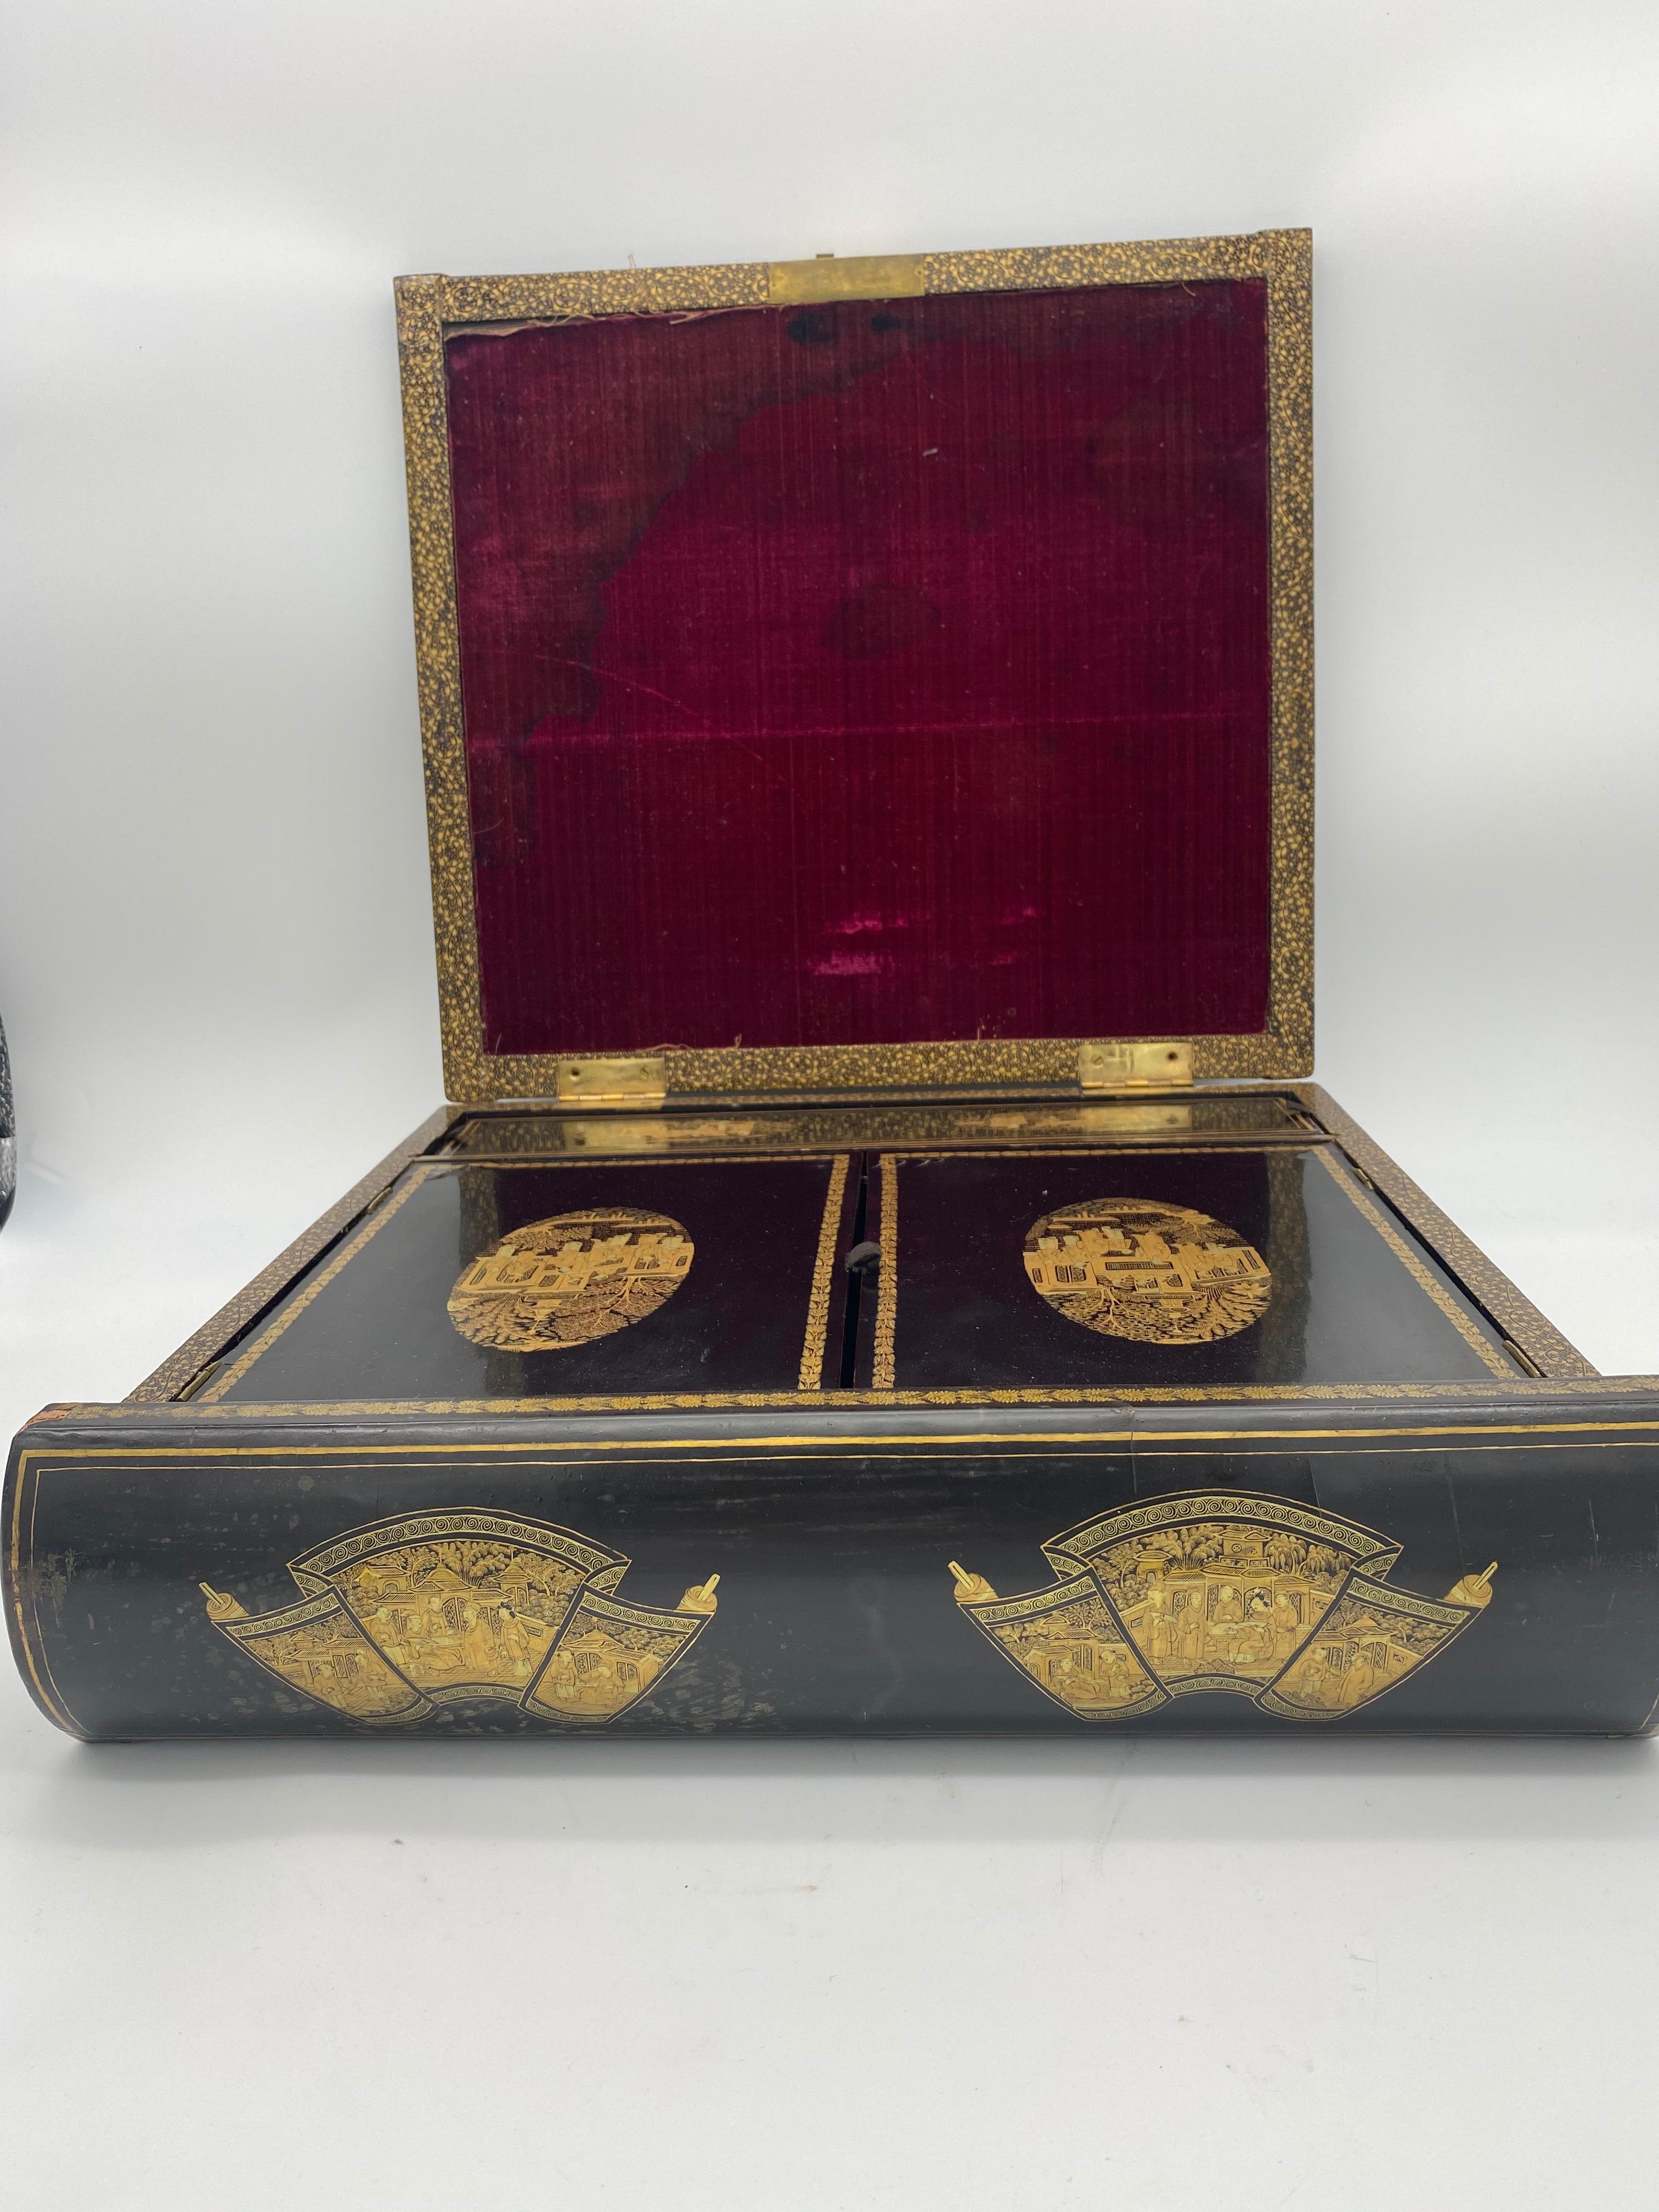 A truly beautiful and amazing piece. From the early 19th century derived from the Qing Dynasty in China, this lacquered writing box is decorated with the designs of two dragons frolicking with a pearl and 100 face. Some tears due to age, see